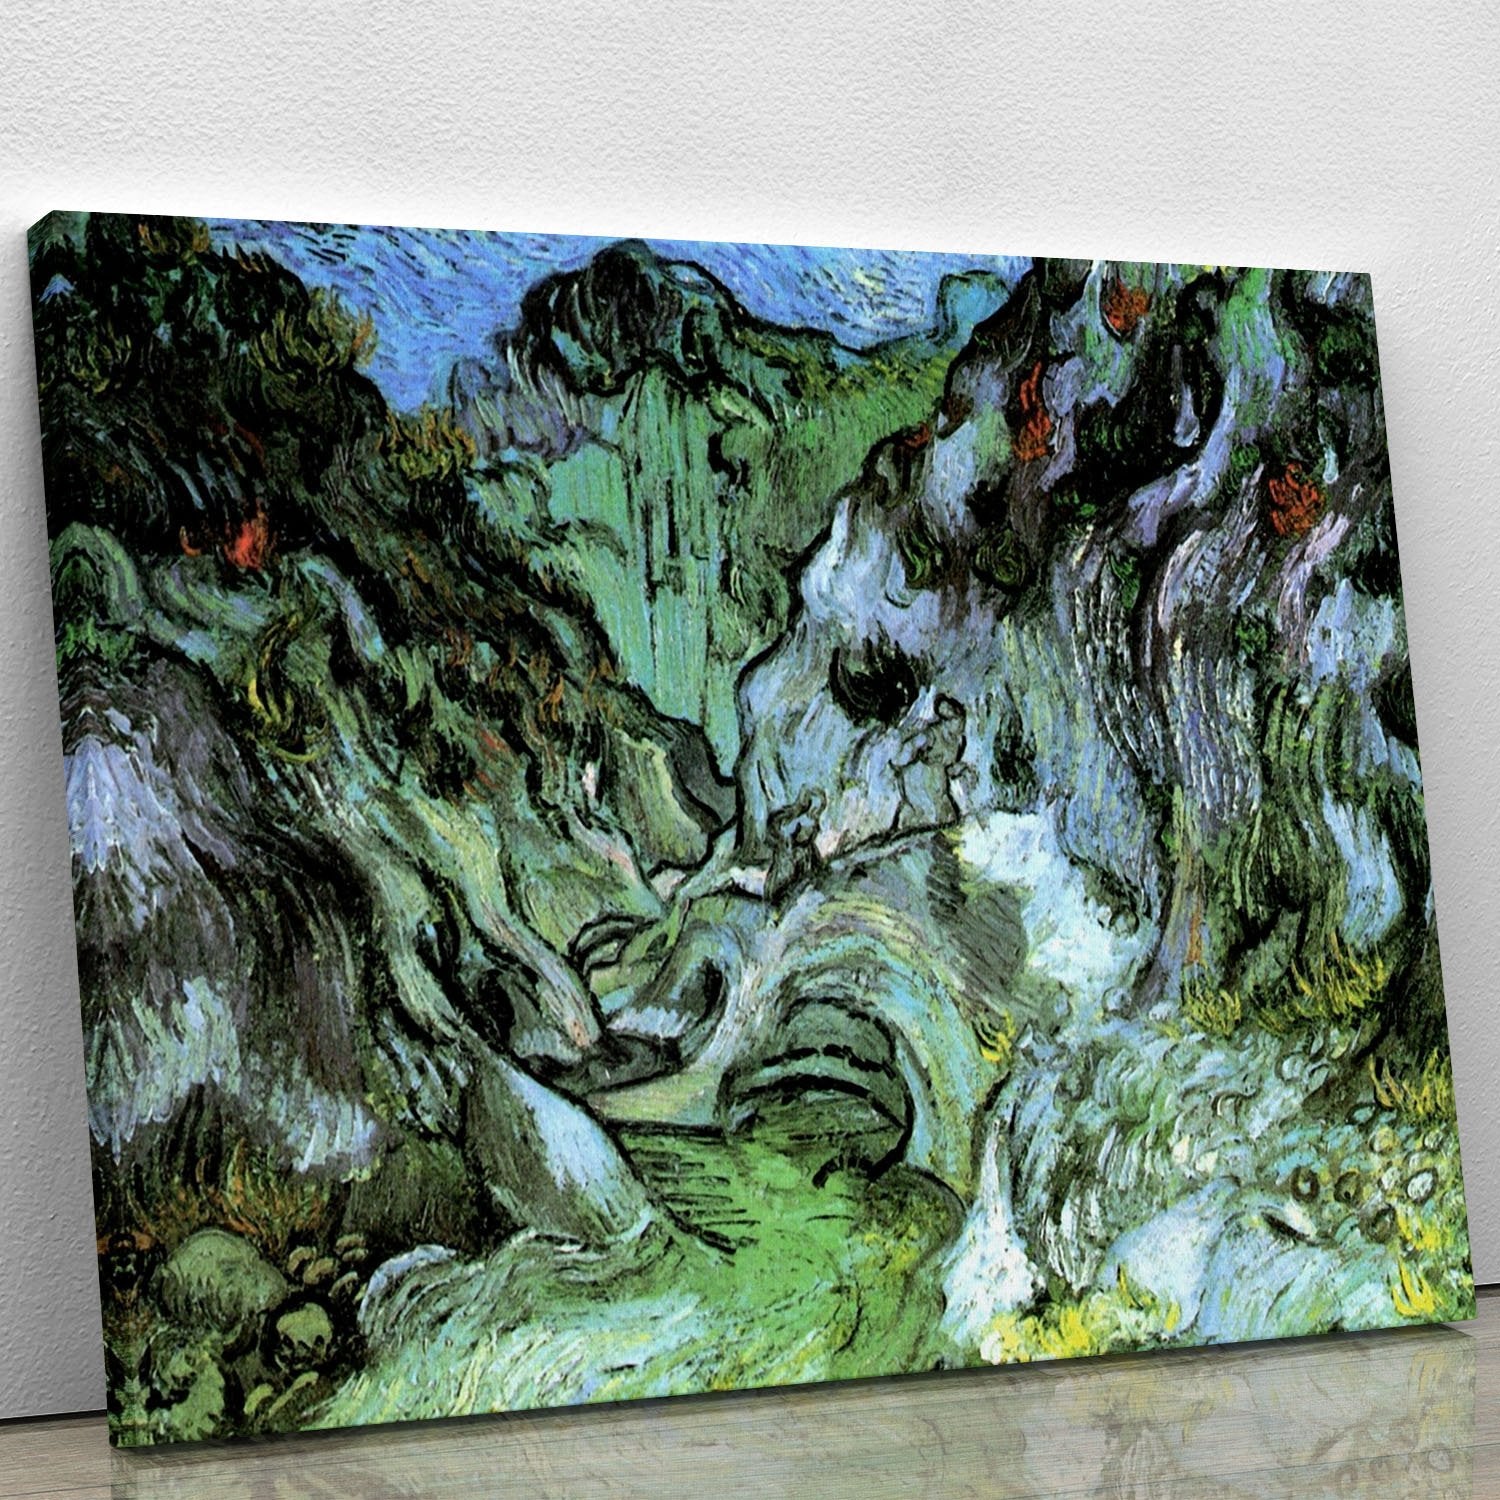 Les Peiroulets Ravine 2 by Van Gogh Canvas Print or Poster